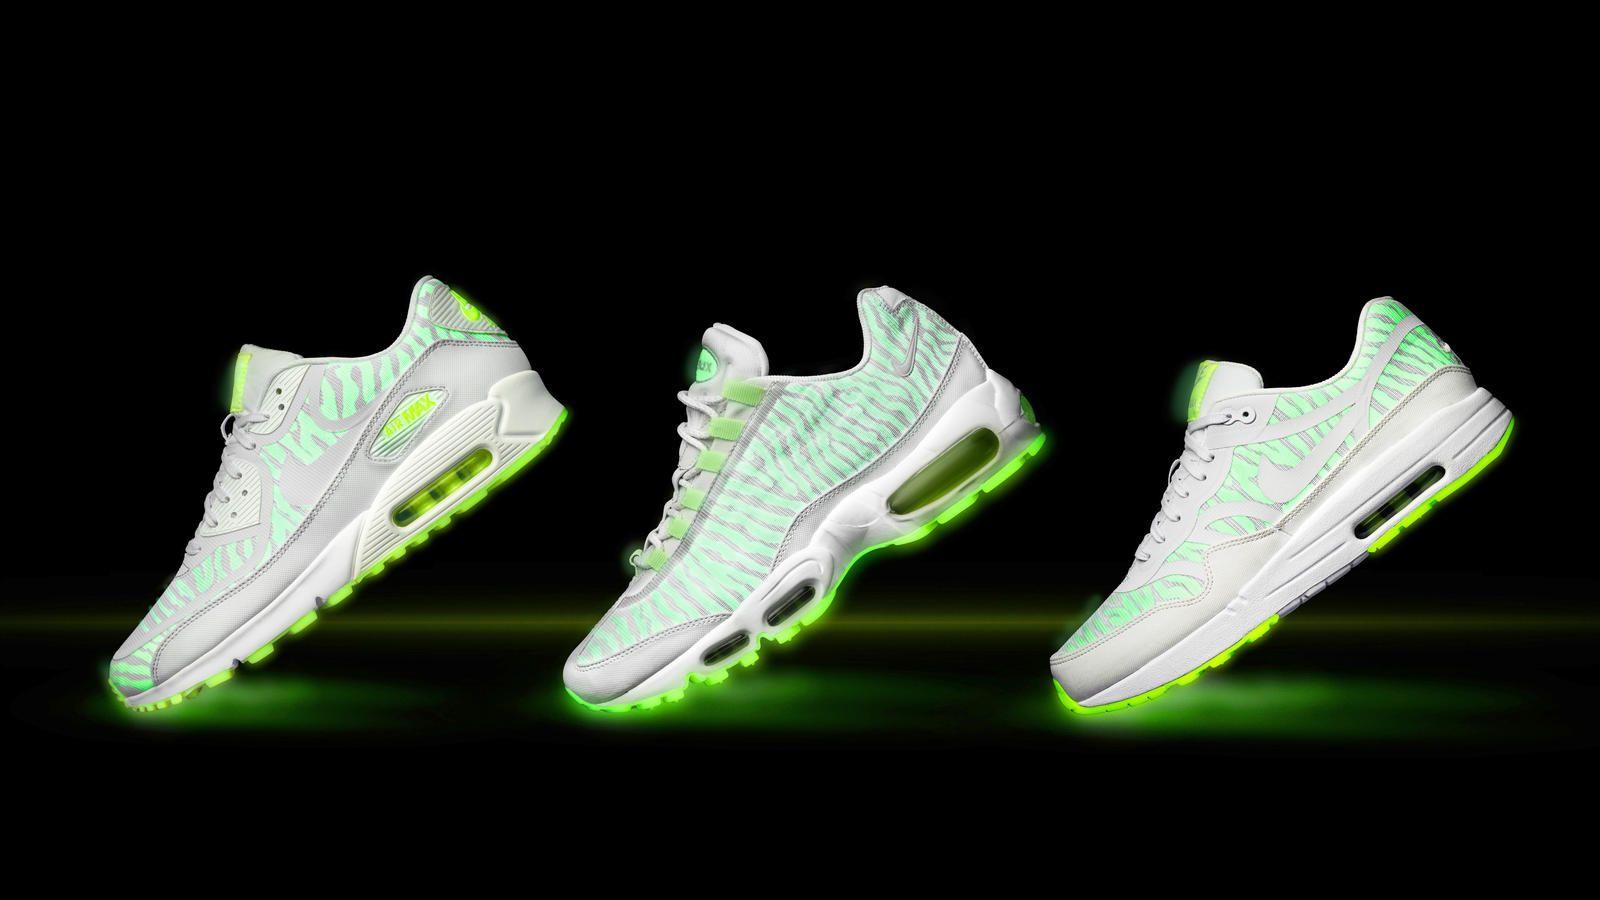 Glow in the Dark Nike Logo - Visible Air Just Got More Visible: The Nike Air Max Glow Collection ...